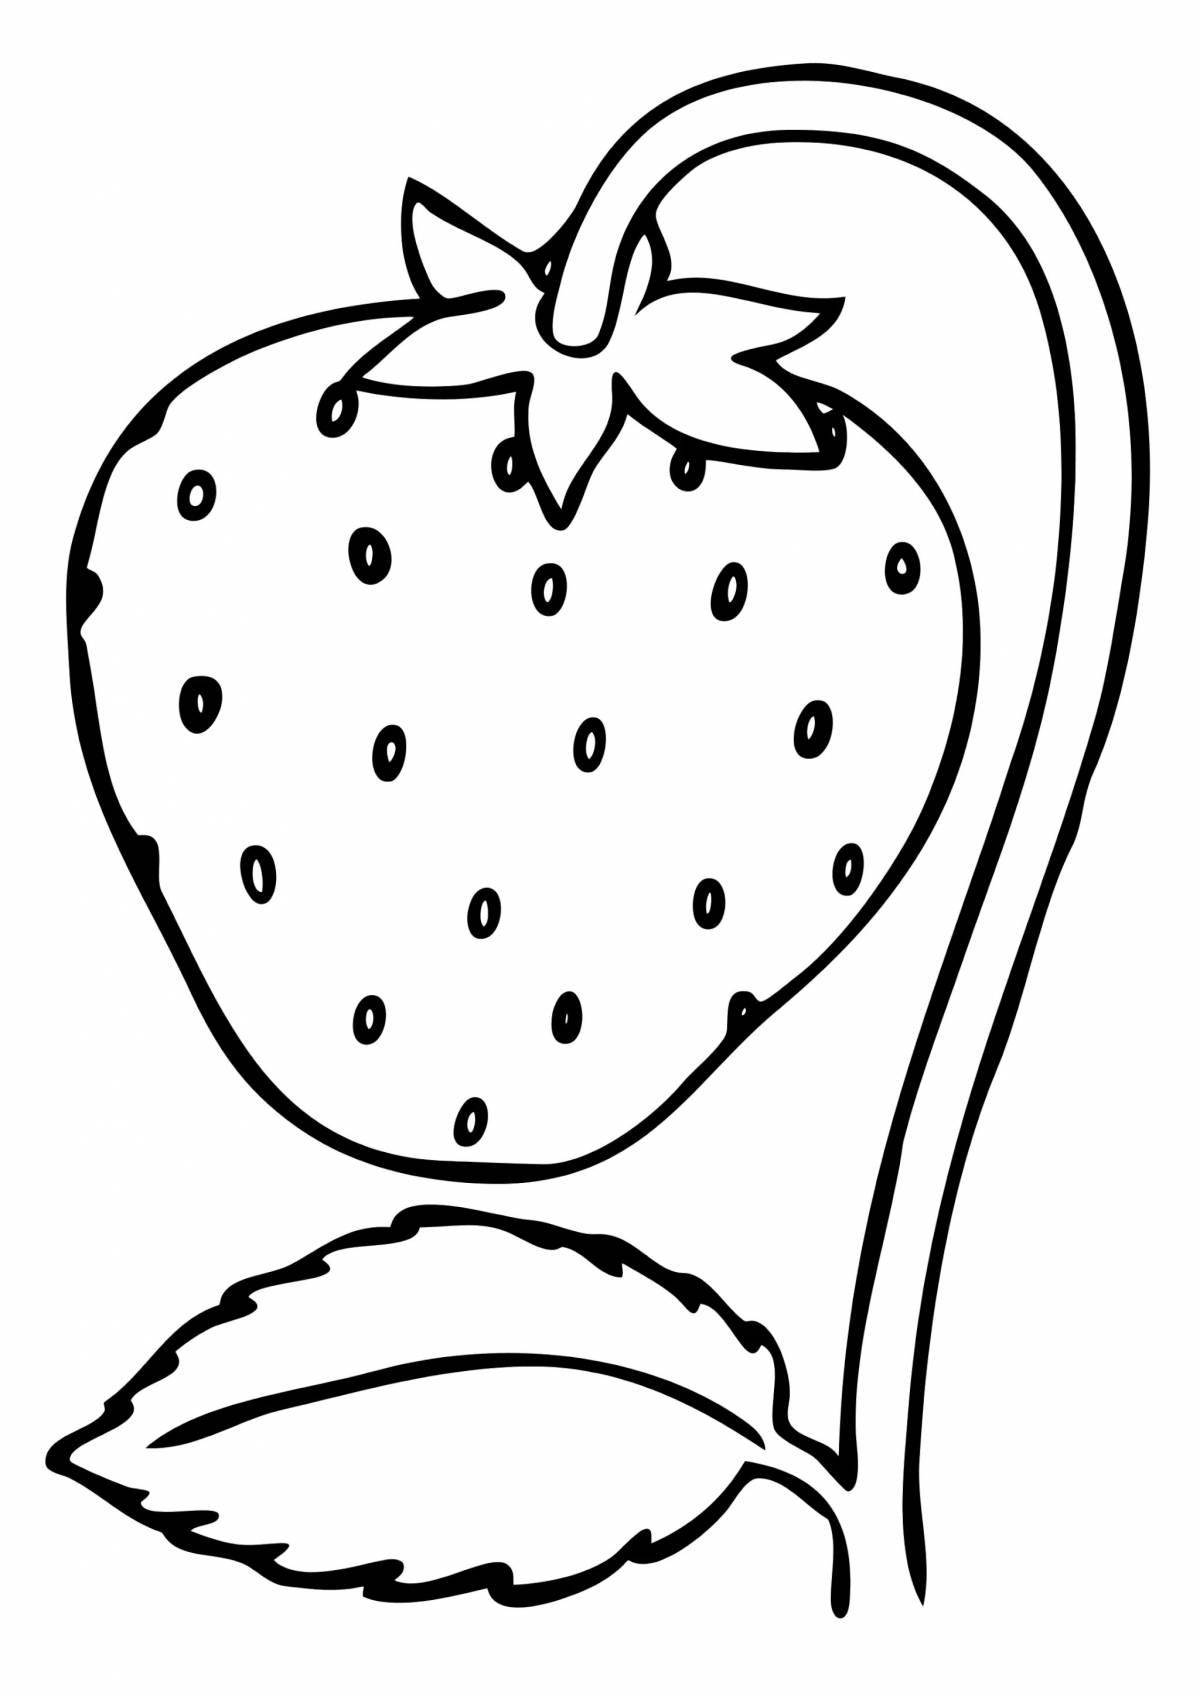 Great strawberry coloring book for kids 3-4 years old